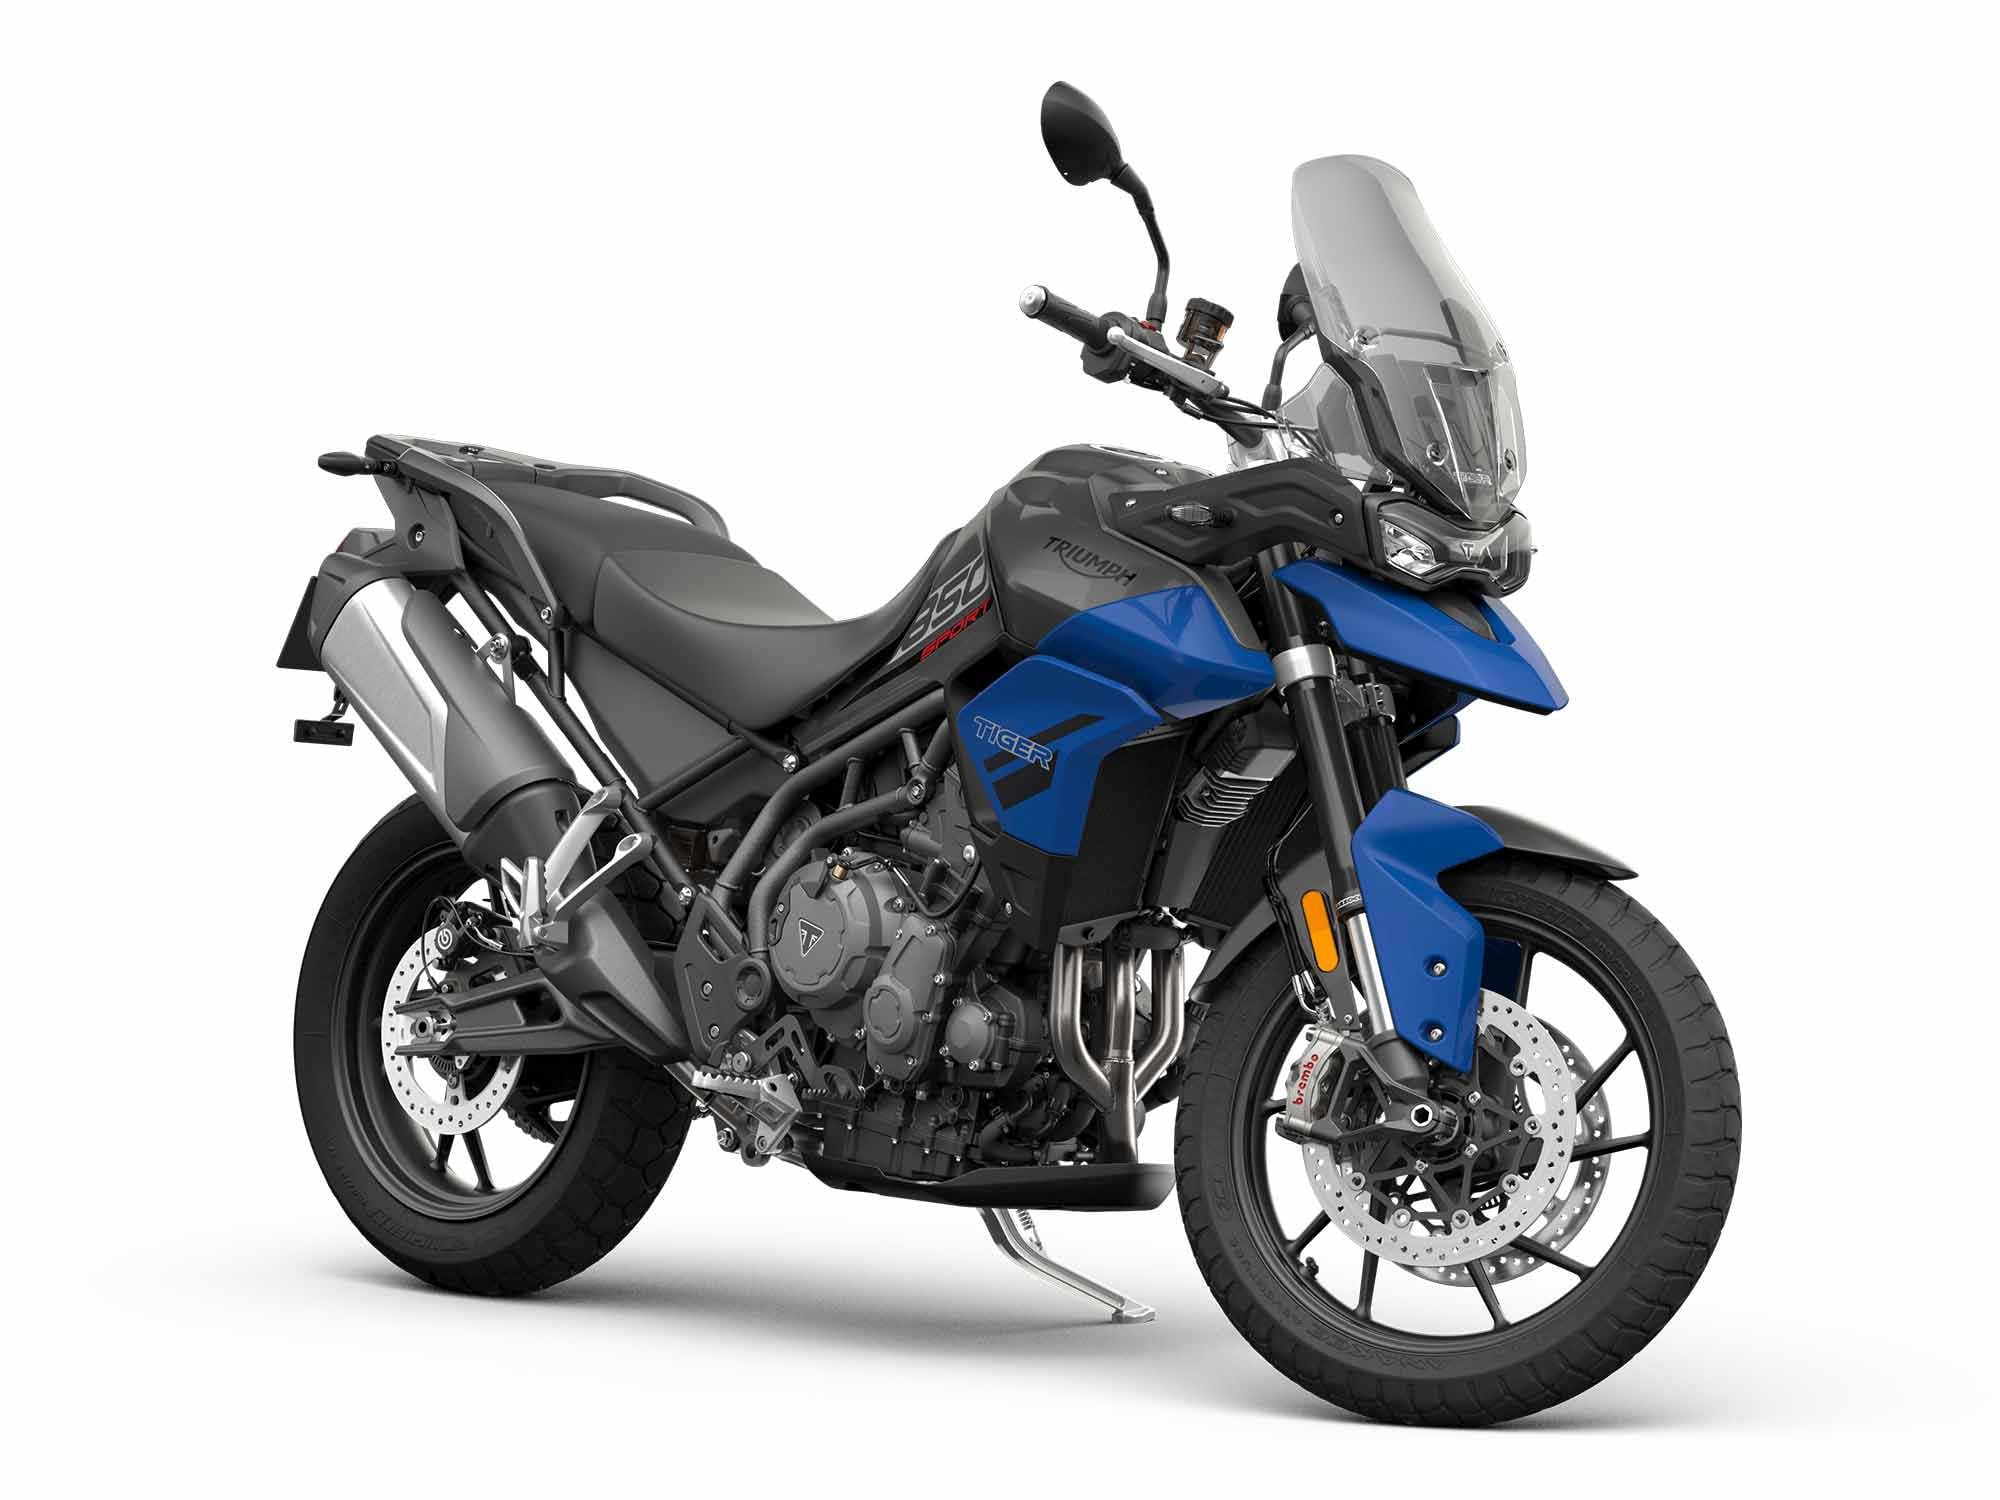 The 850 Sport in Graphite and Caspian Blue. Triumph is hoping its pared-down spec sheet is less intimidating to some consumers.